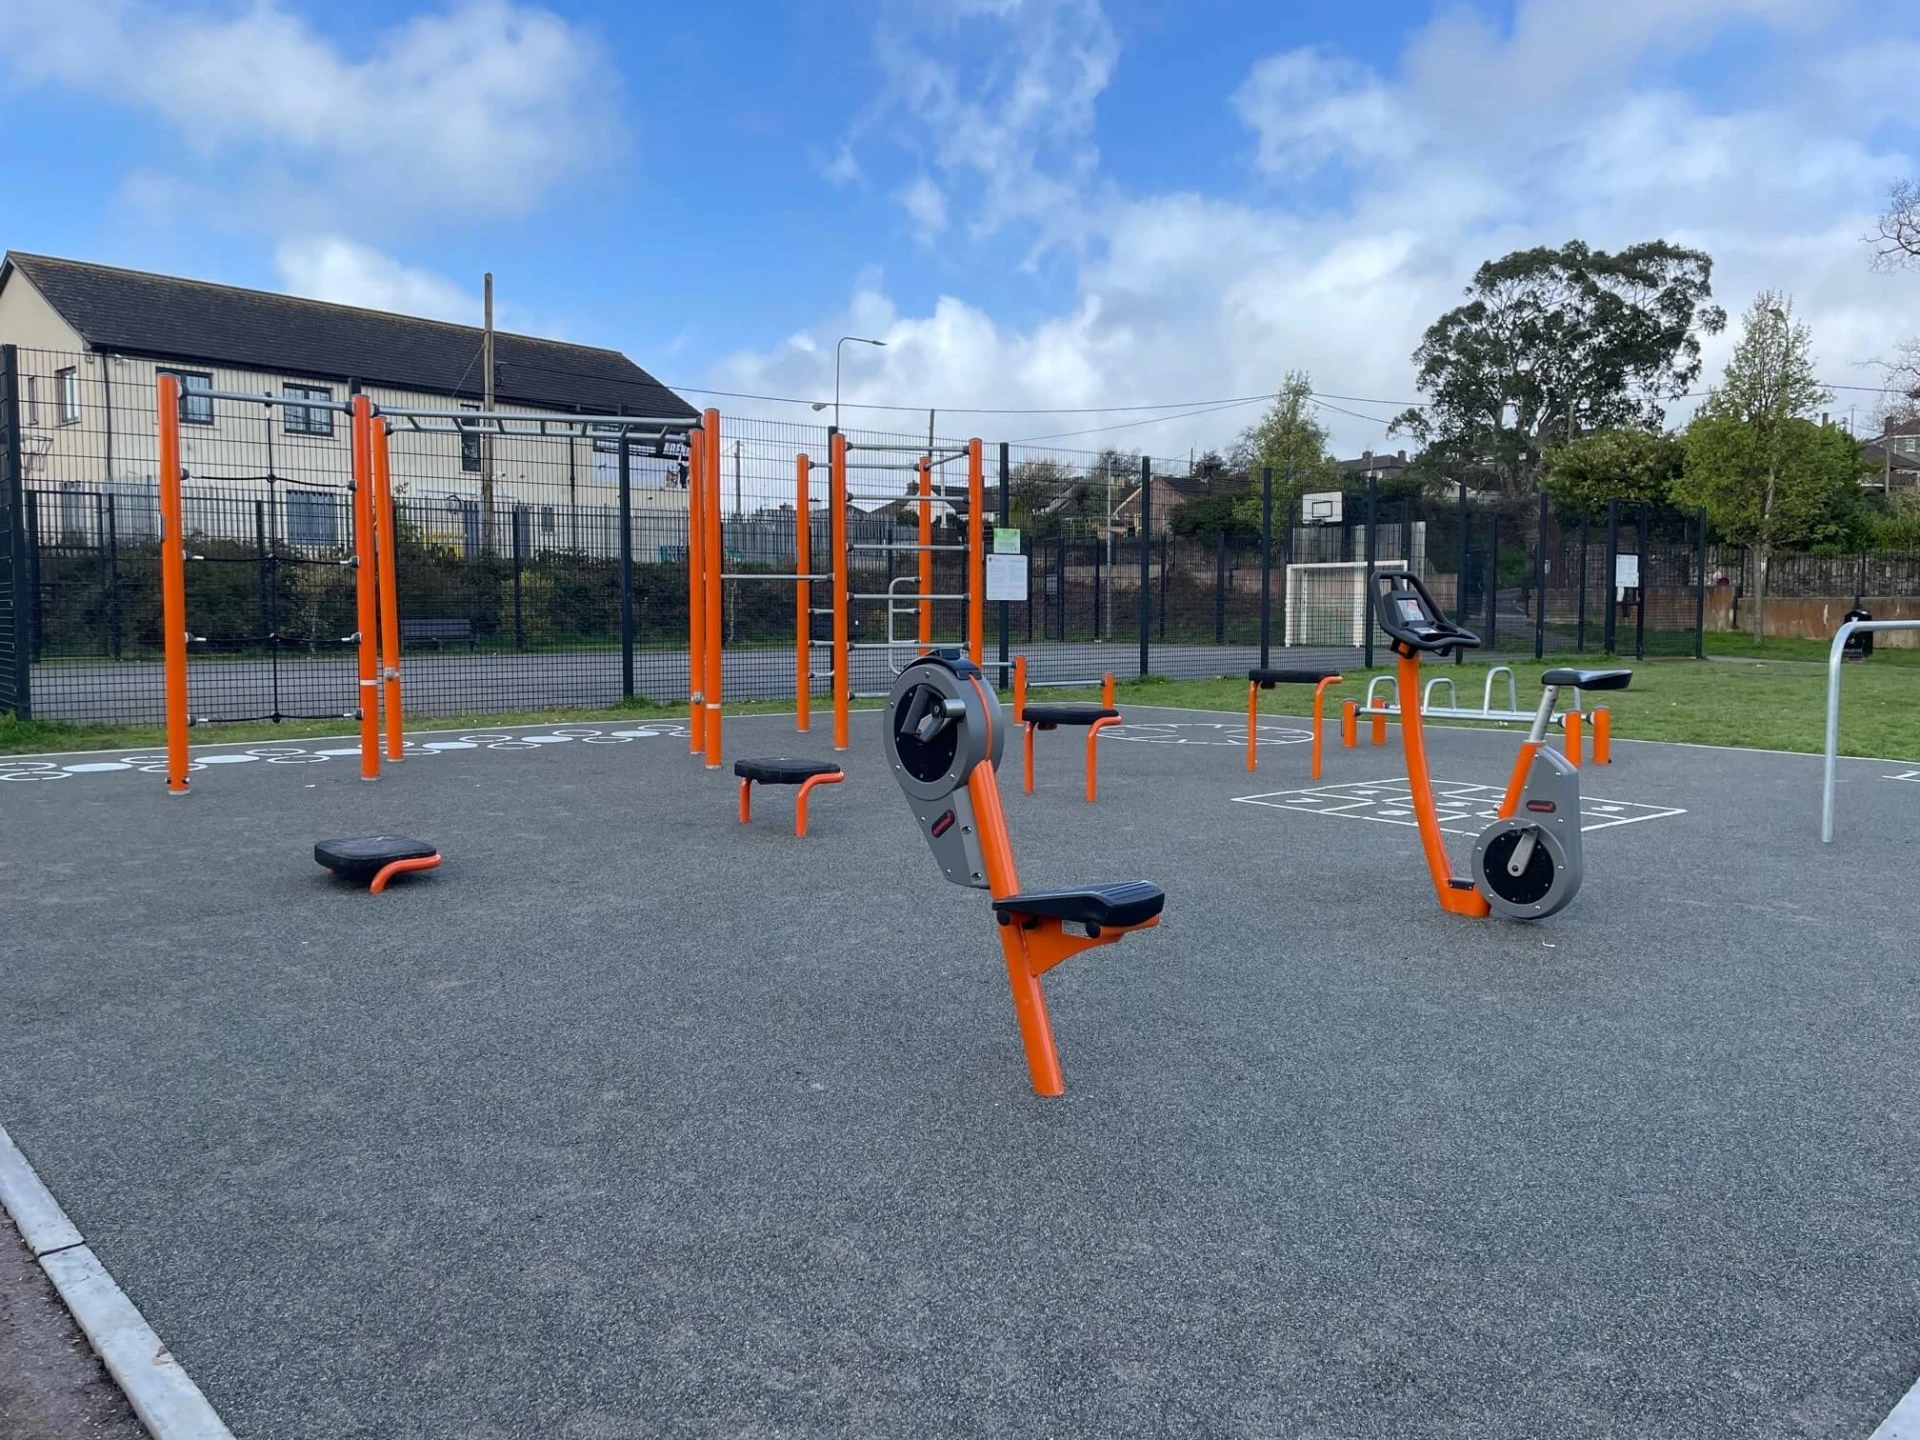 outdoor gym in Cork, Ireland with cardio and street workout